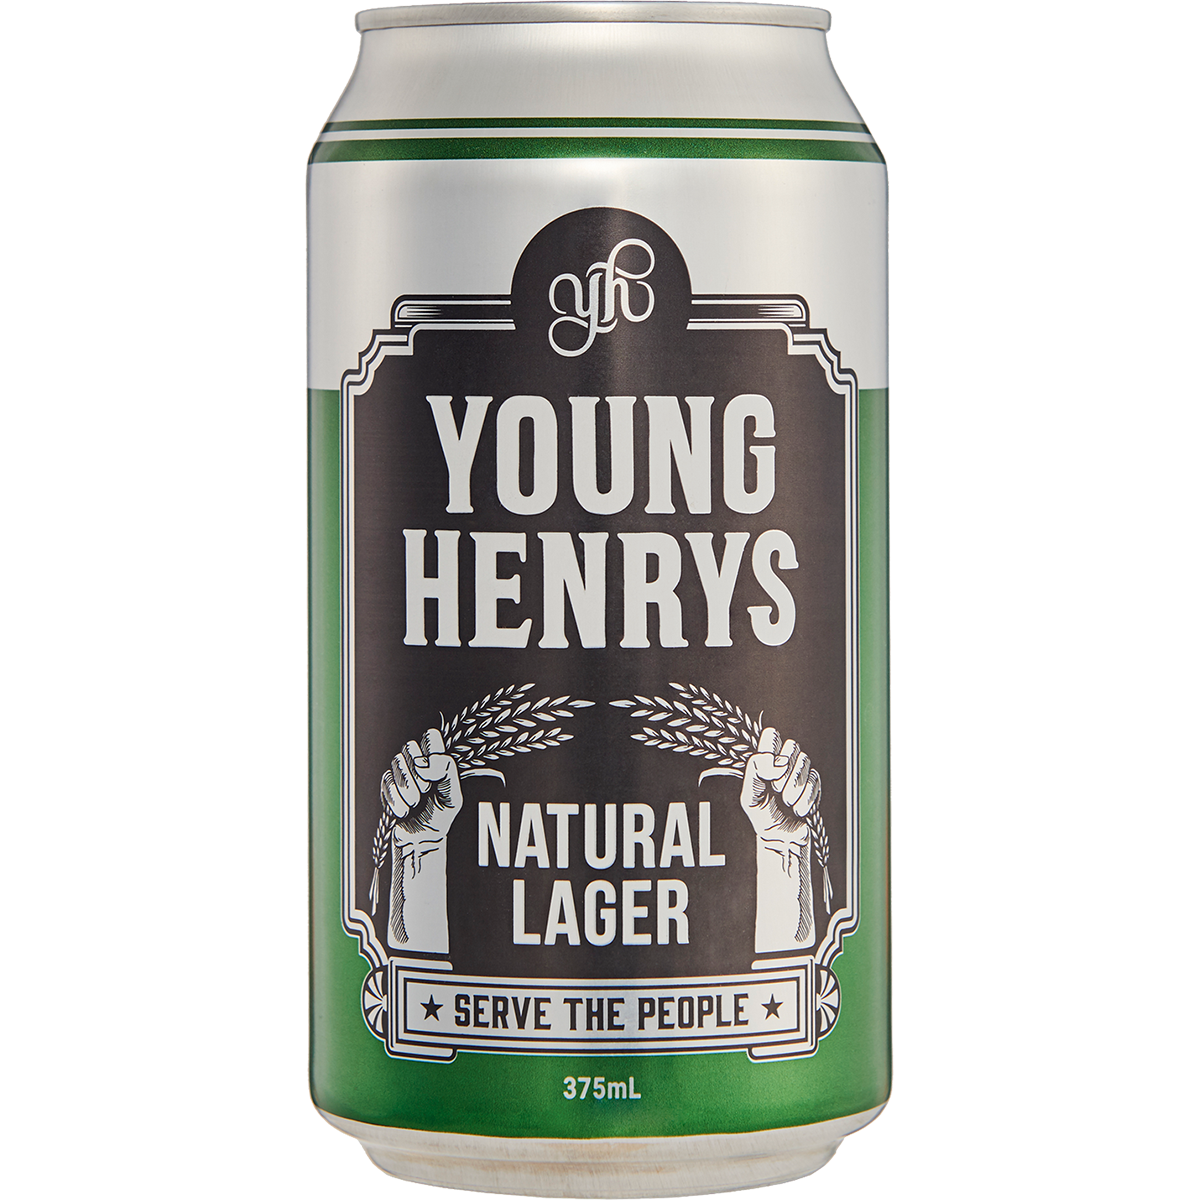 Young Henrys Natural Lager Cans 24x375ml product image.